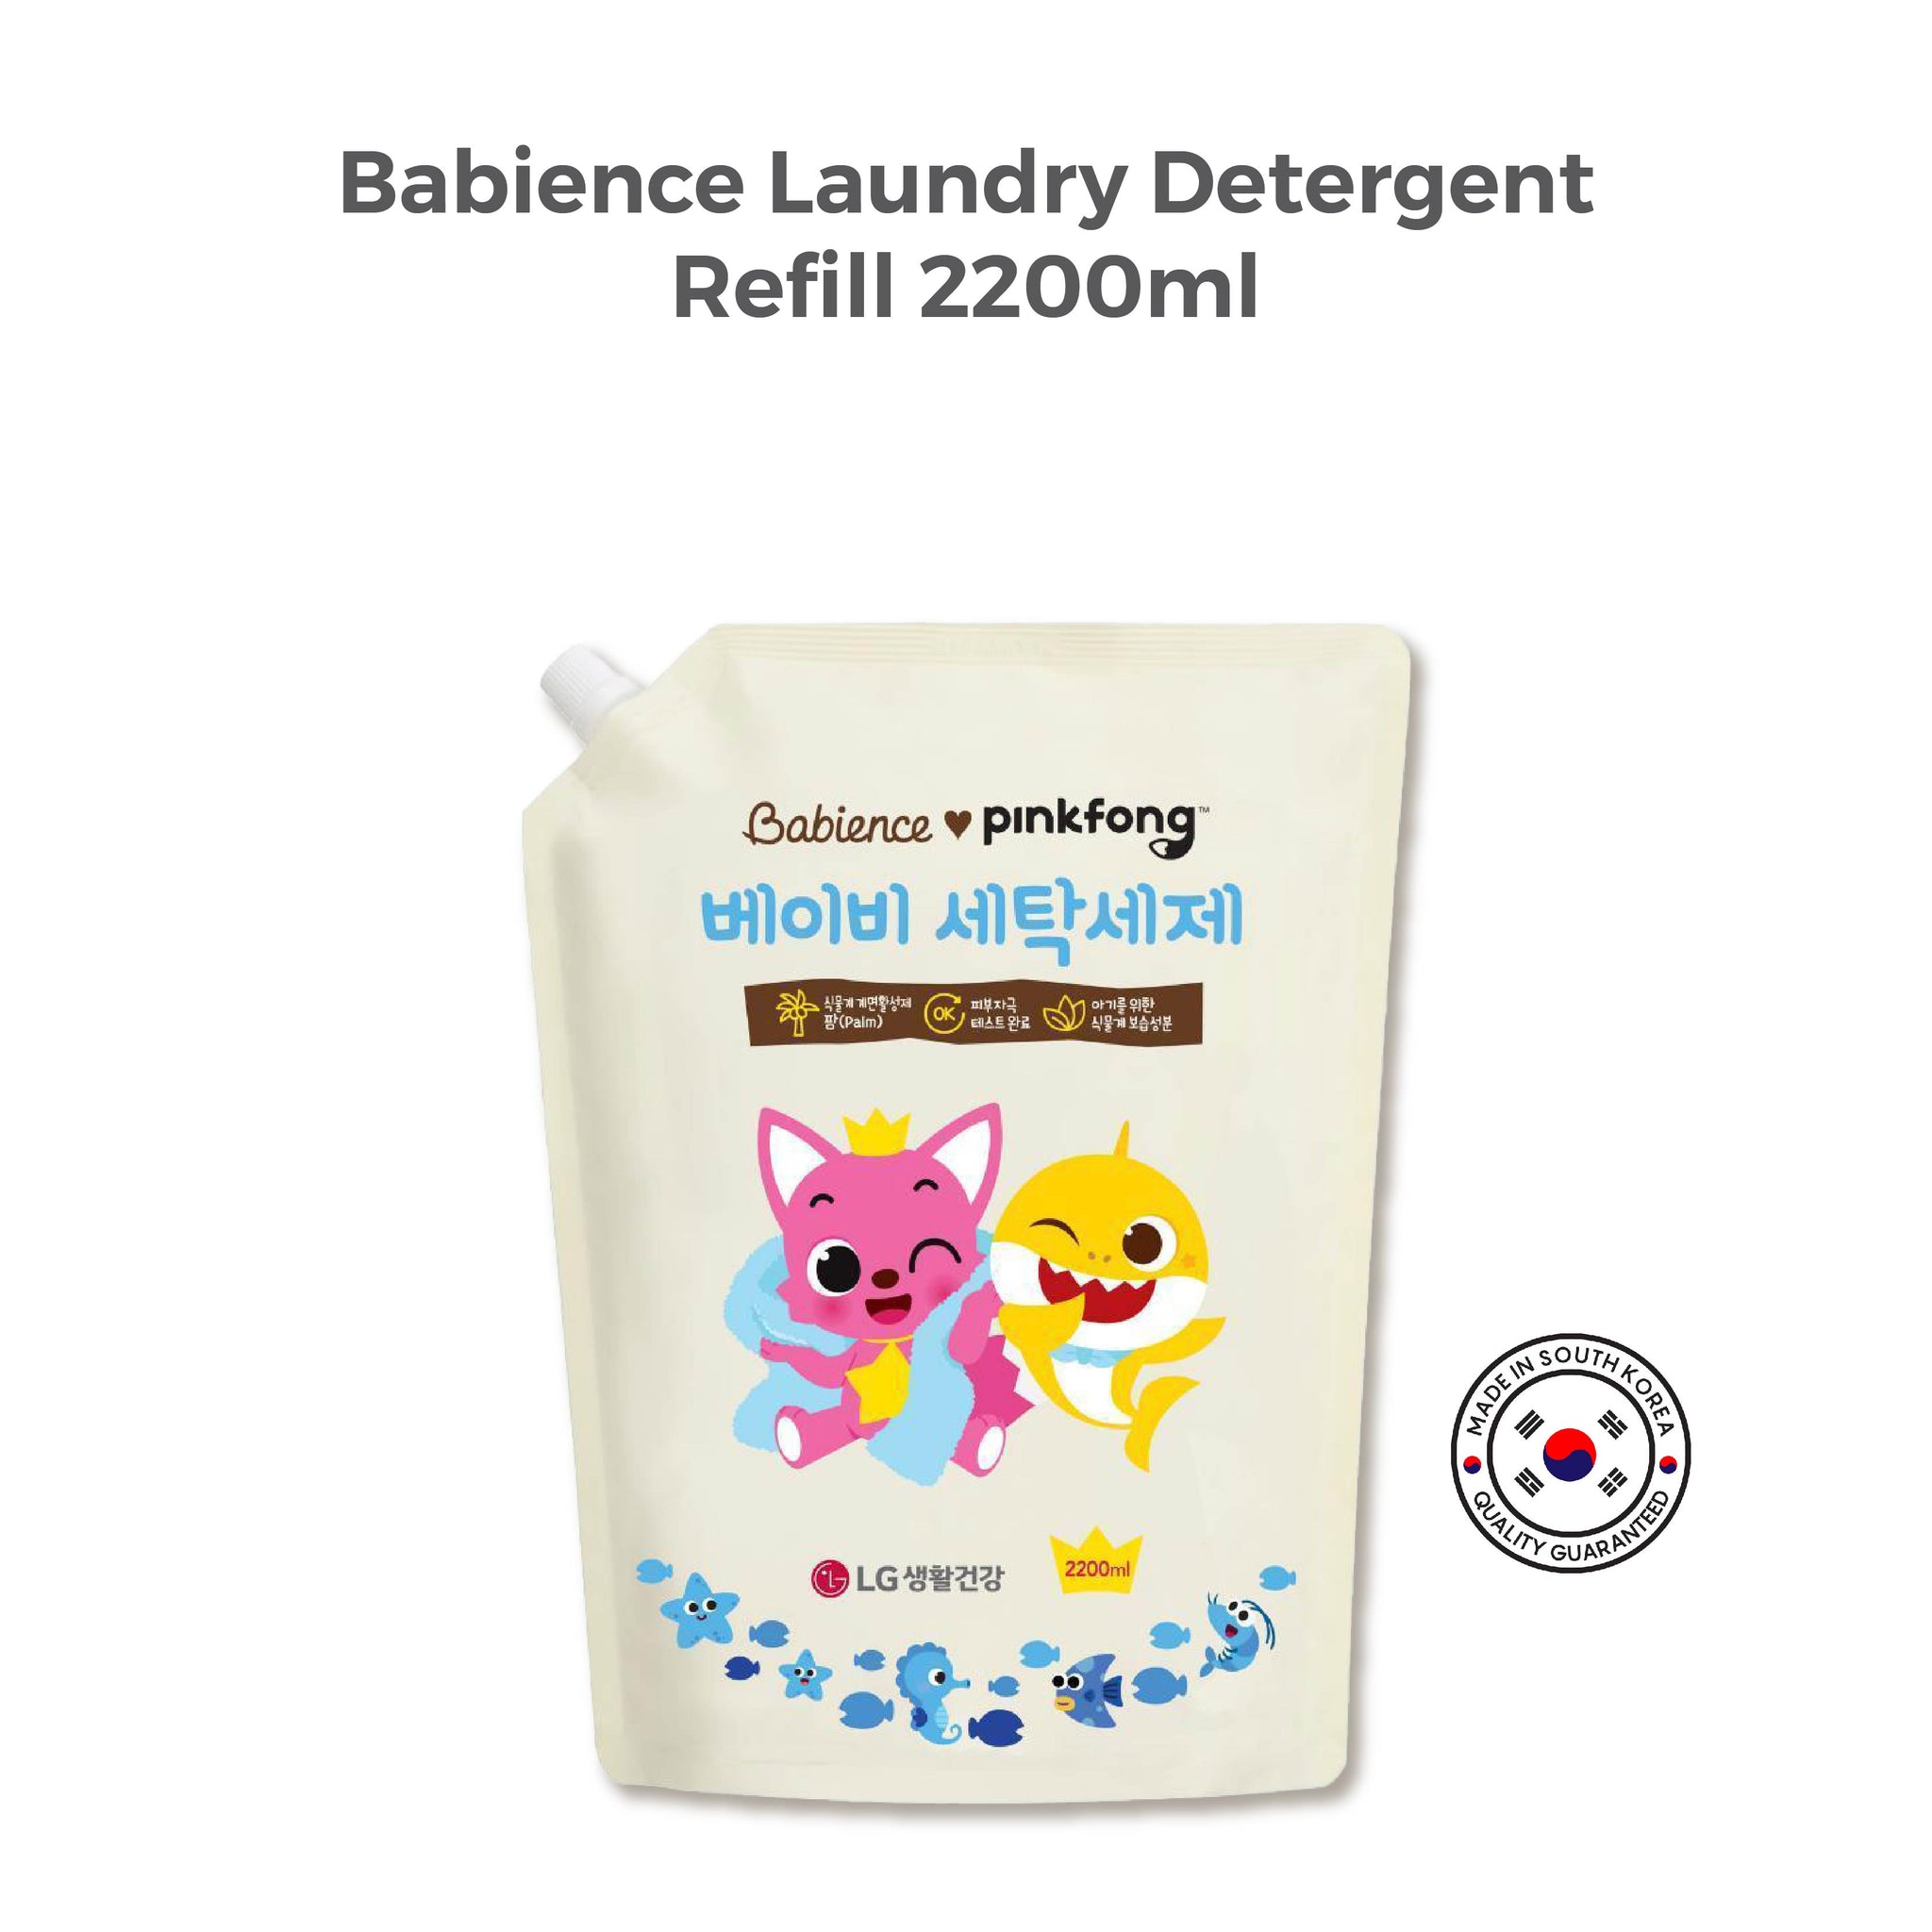 Buy laundry detergent in Singapore - Babience Laundry Detergent Refill 2200ml High-quality laundry detergent